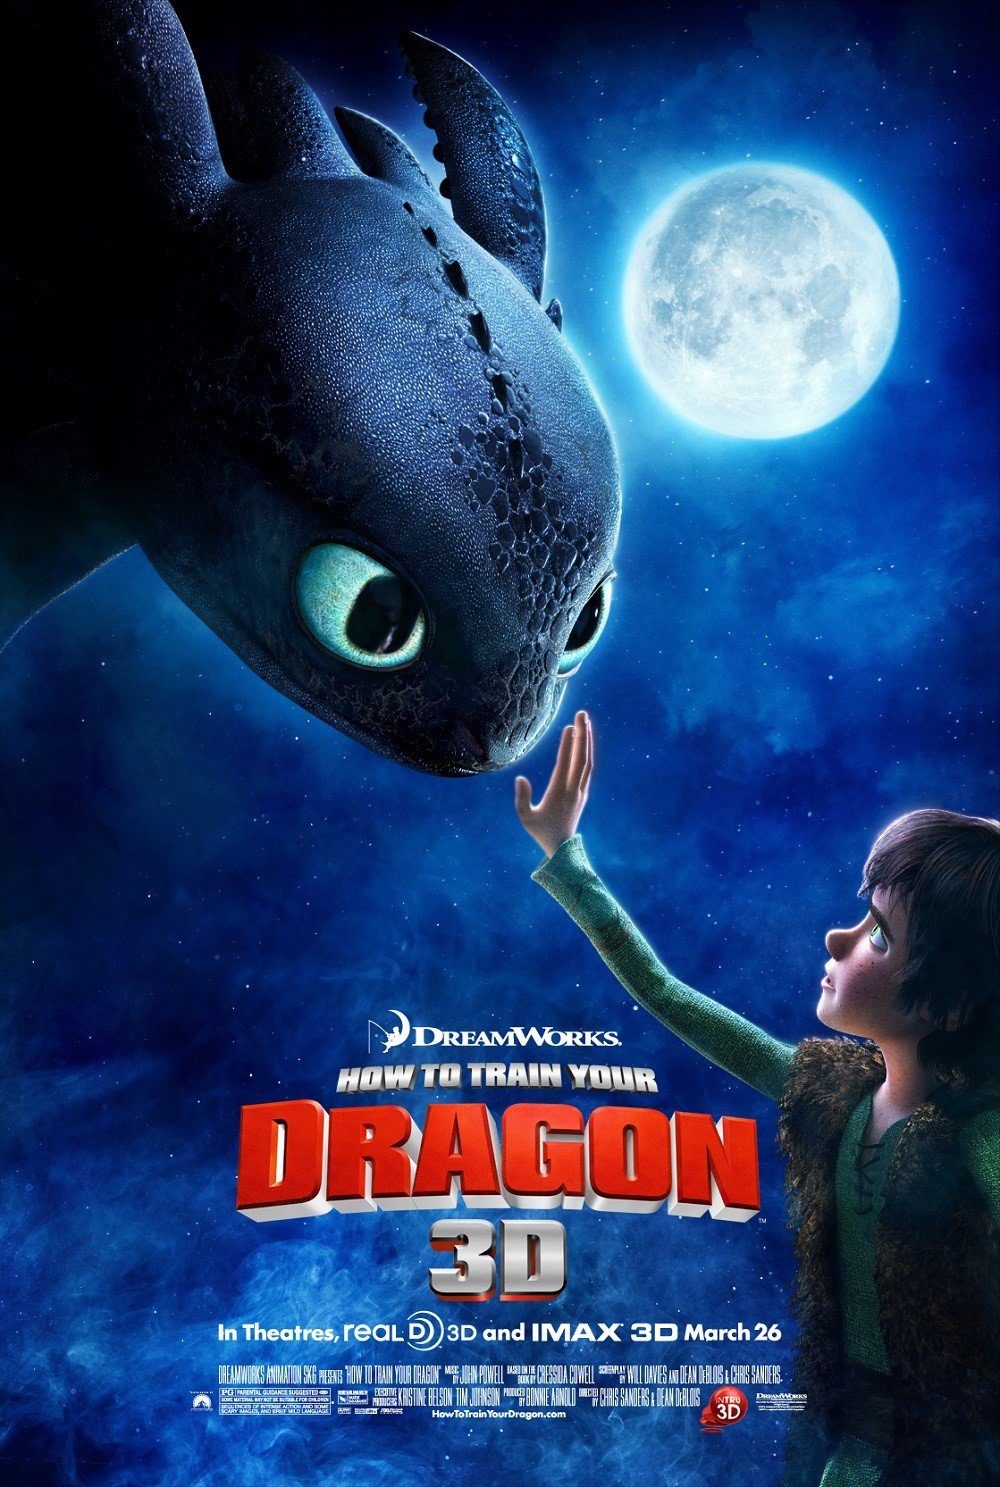 How To Train Your Dragon - Top Animated Movies